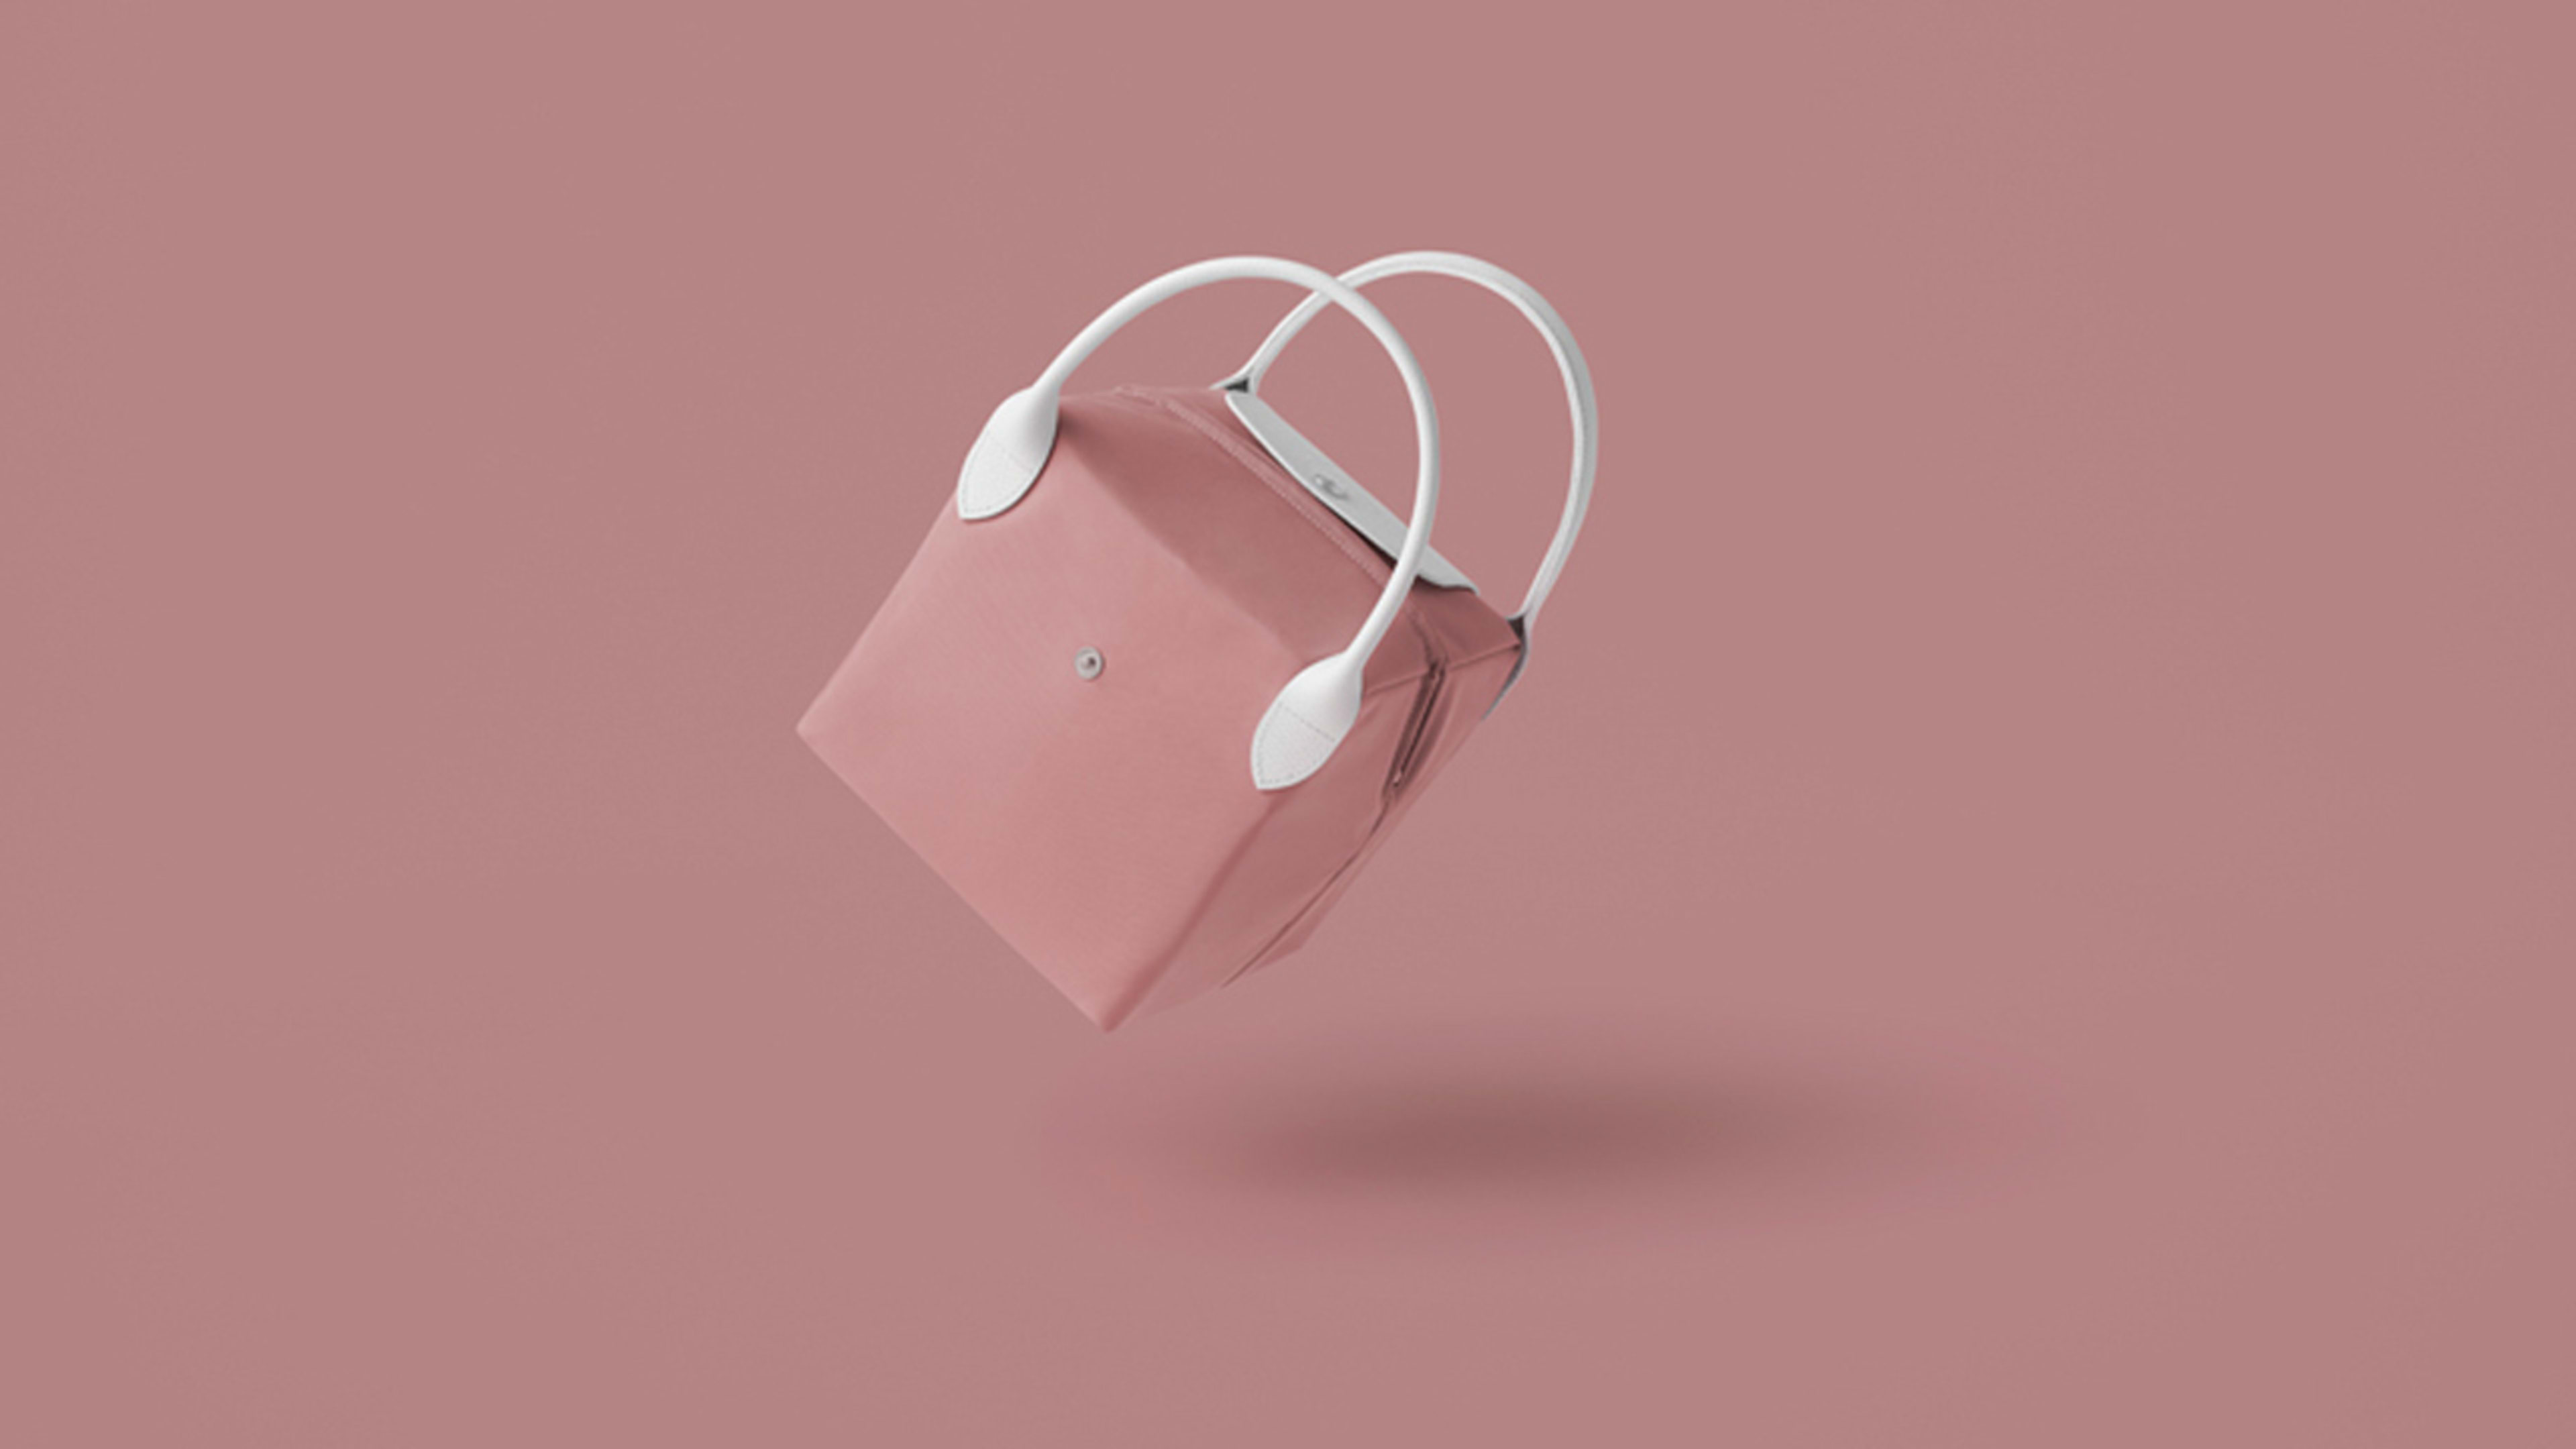 Nendo and Longchamp collab on purses that double as storage boxes